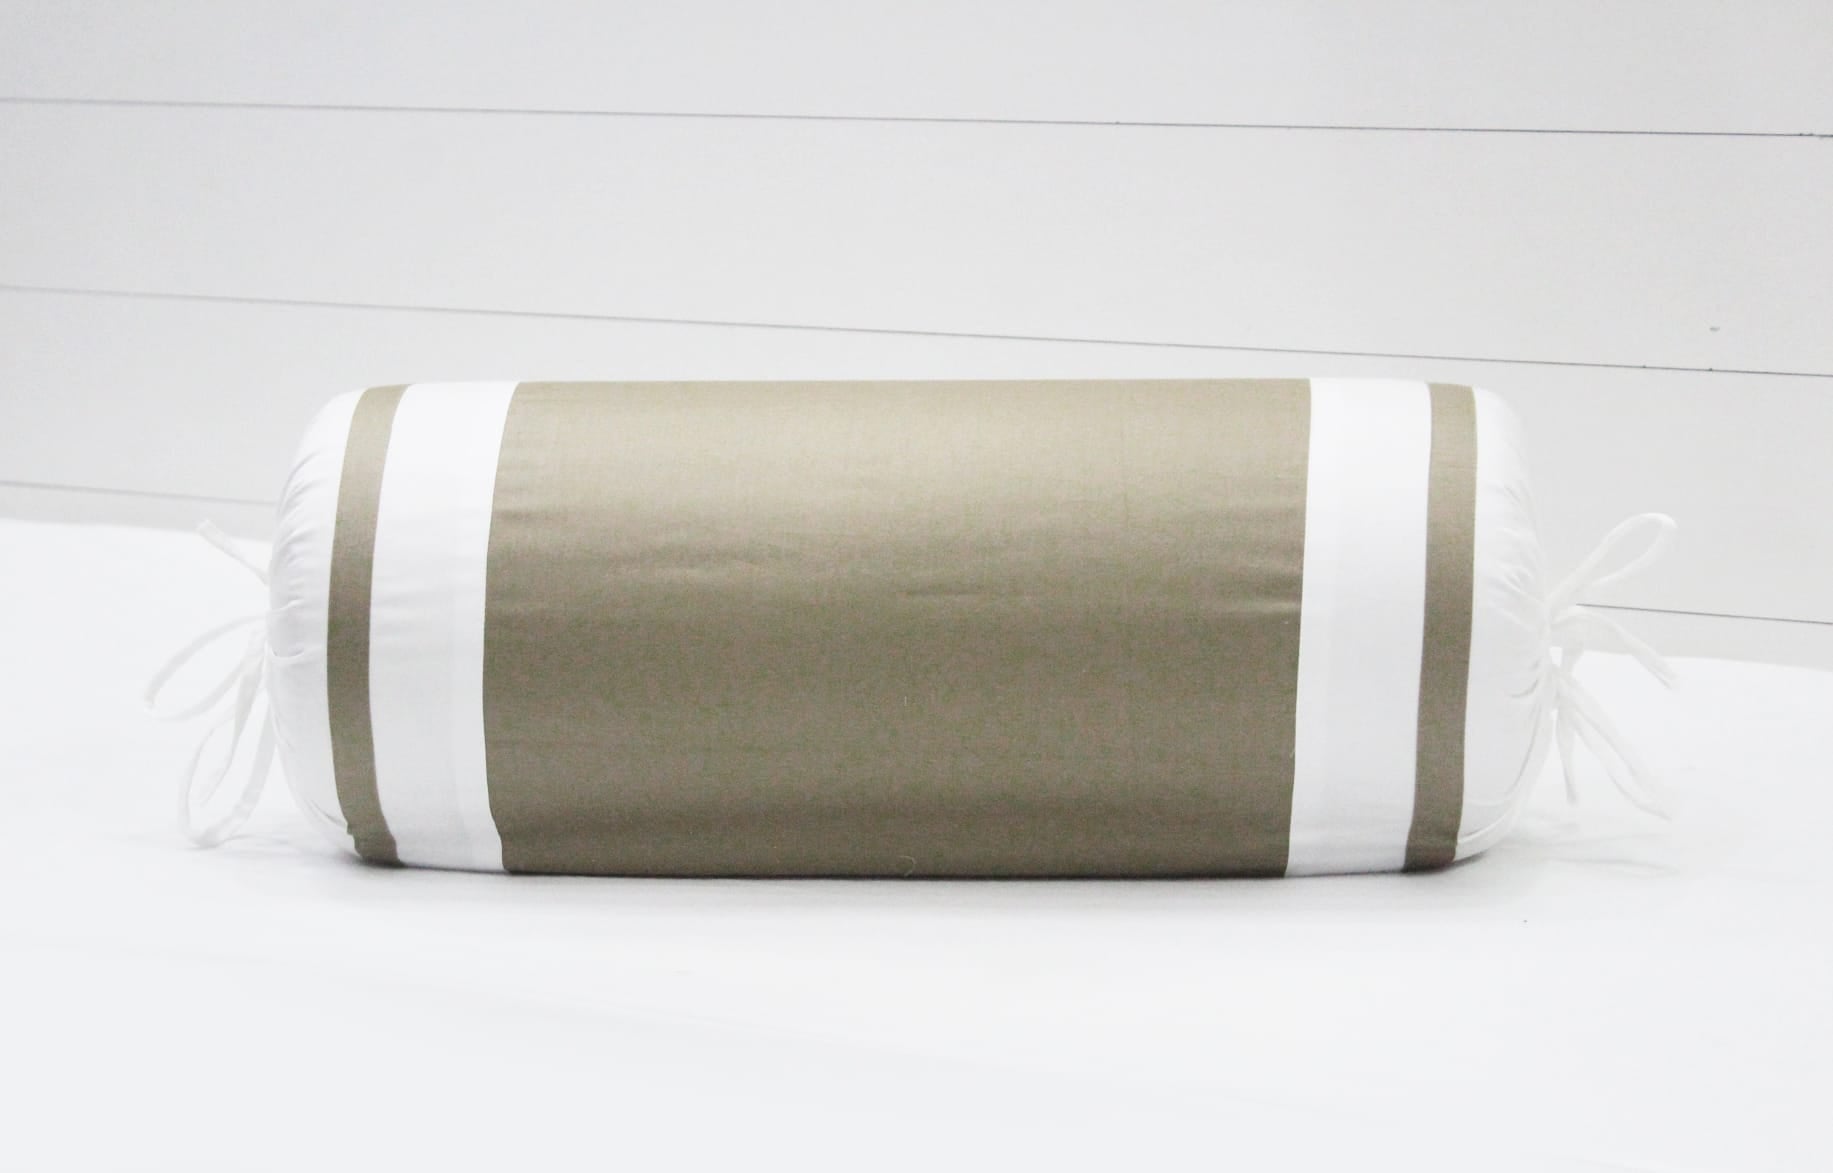 400 TC Luxurious Cotton Satin Bolster Cover Set in Light Brown-2Pcs